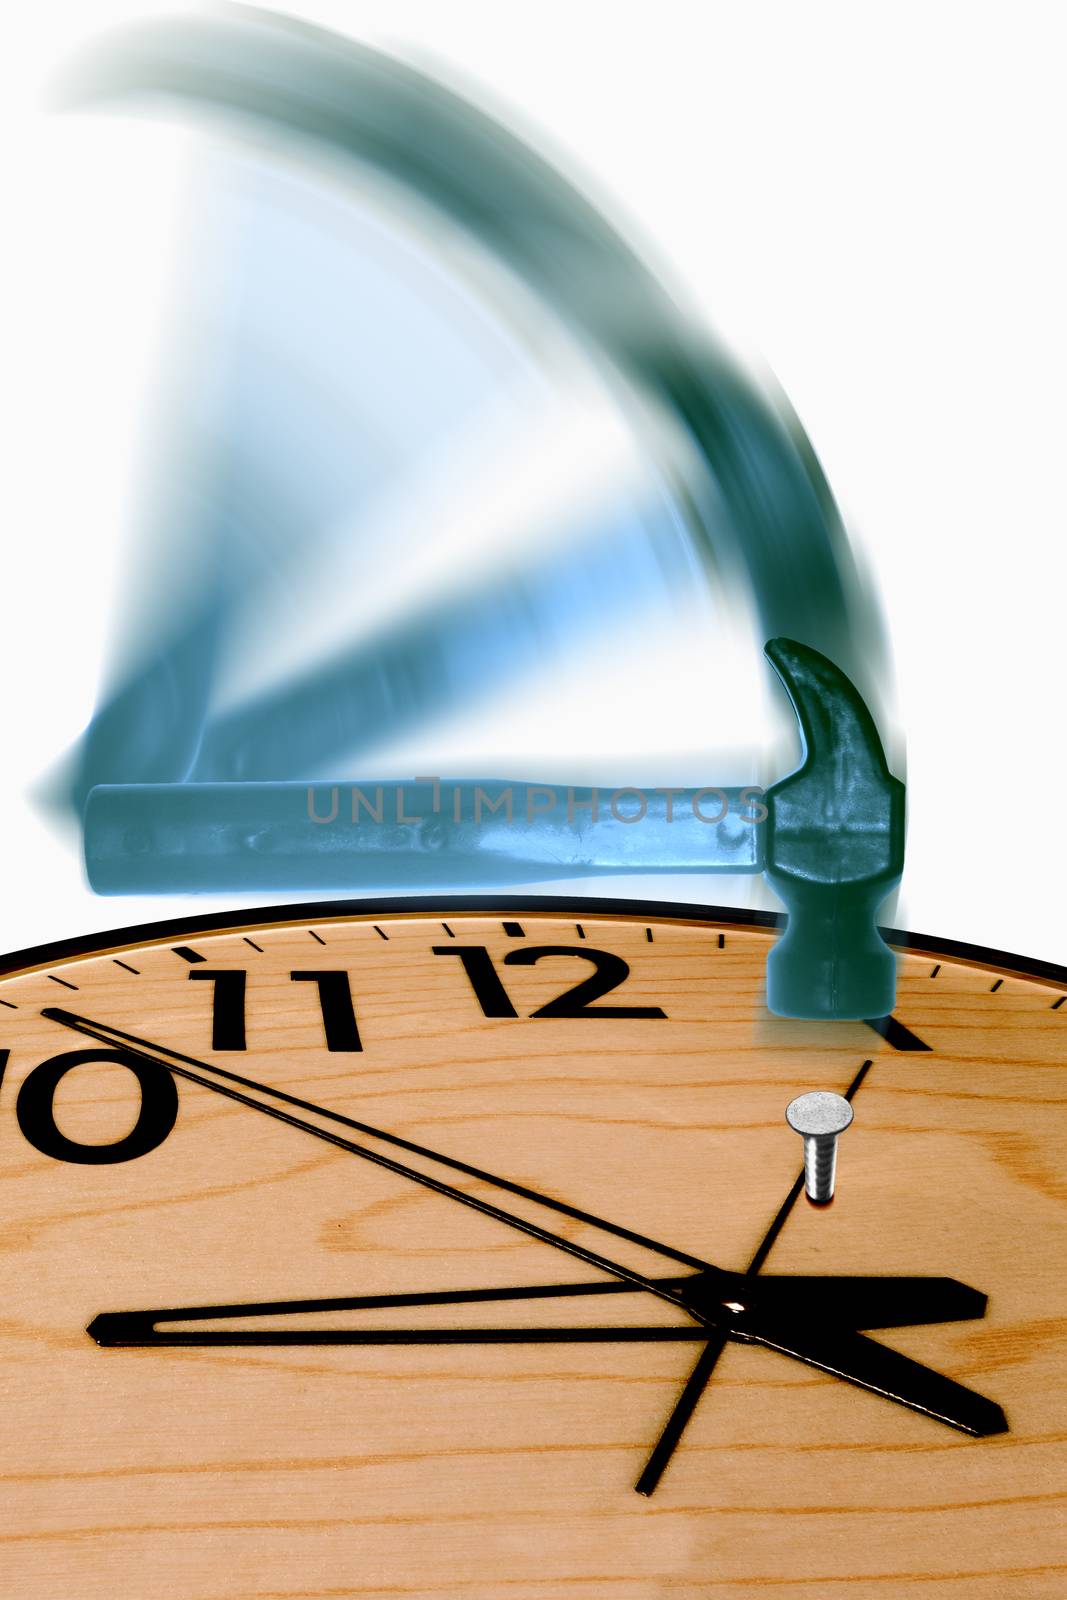 Hammer Hitting Nail in Clock with Motion Blur, Concept